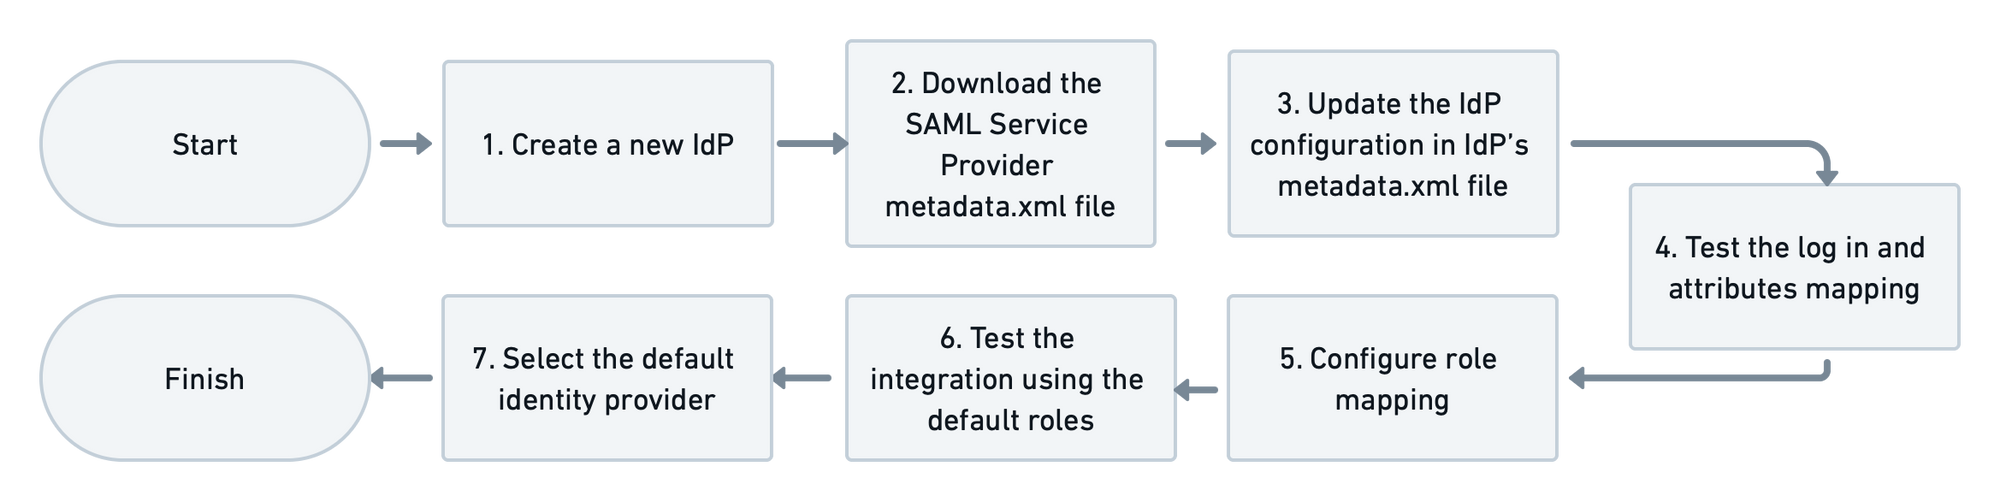 7_Step_Guide_to_Implementation_of_SAML_SSO_.png